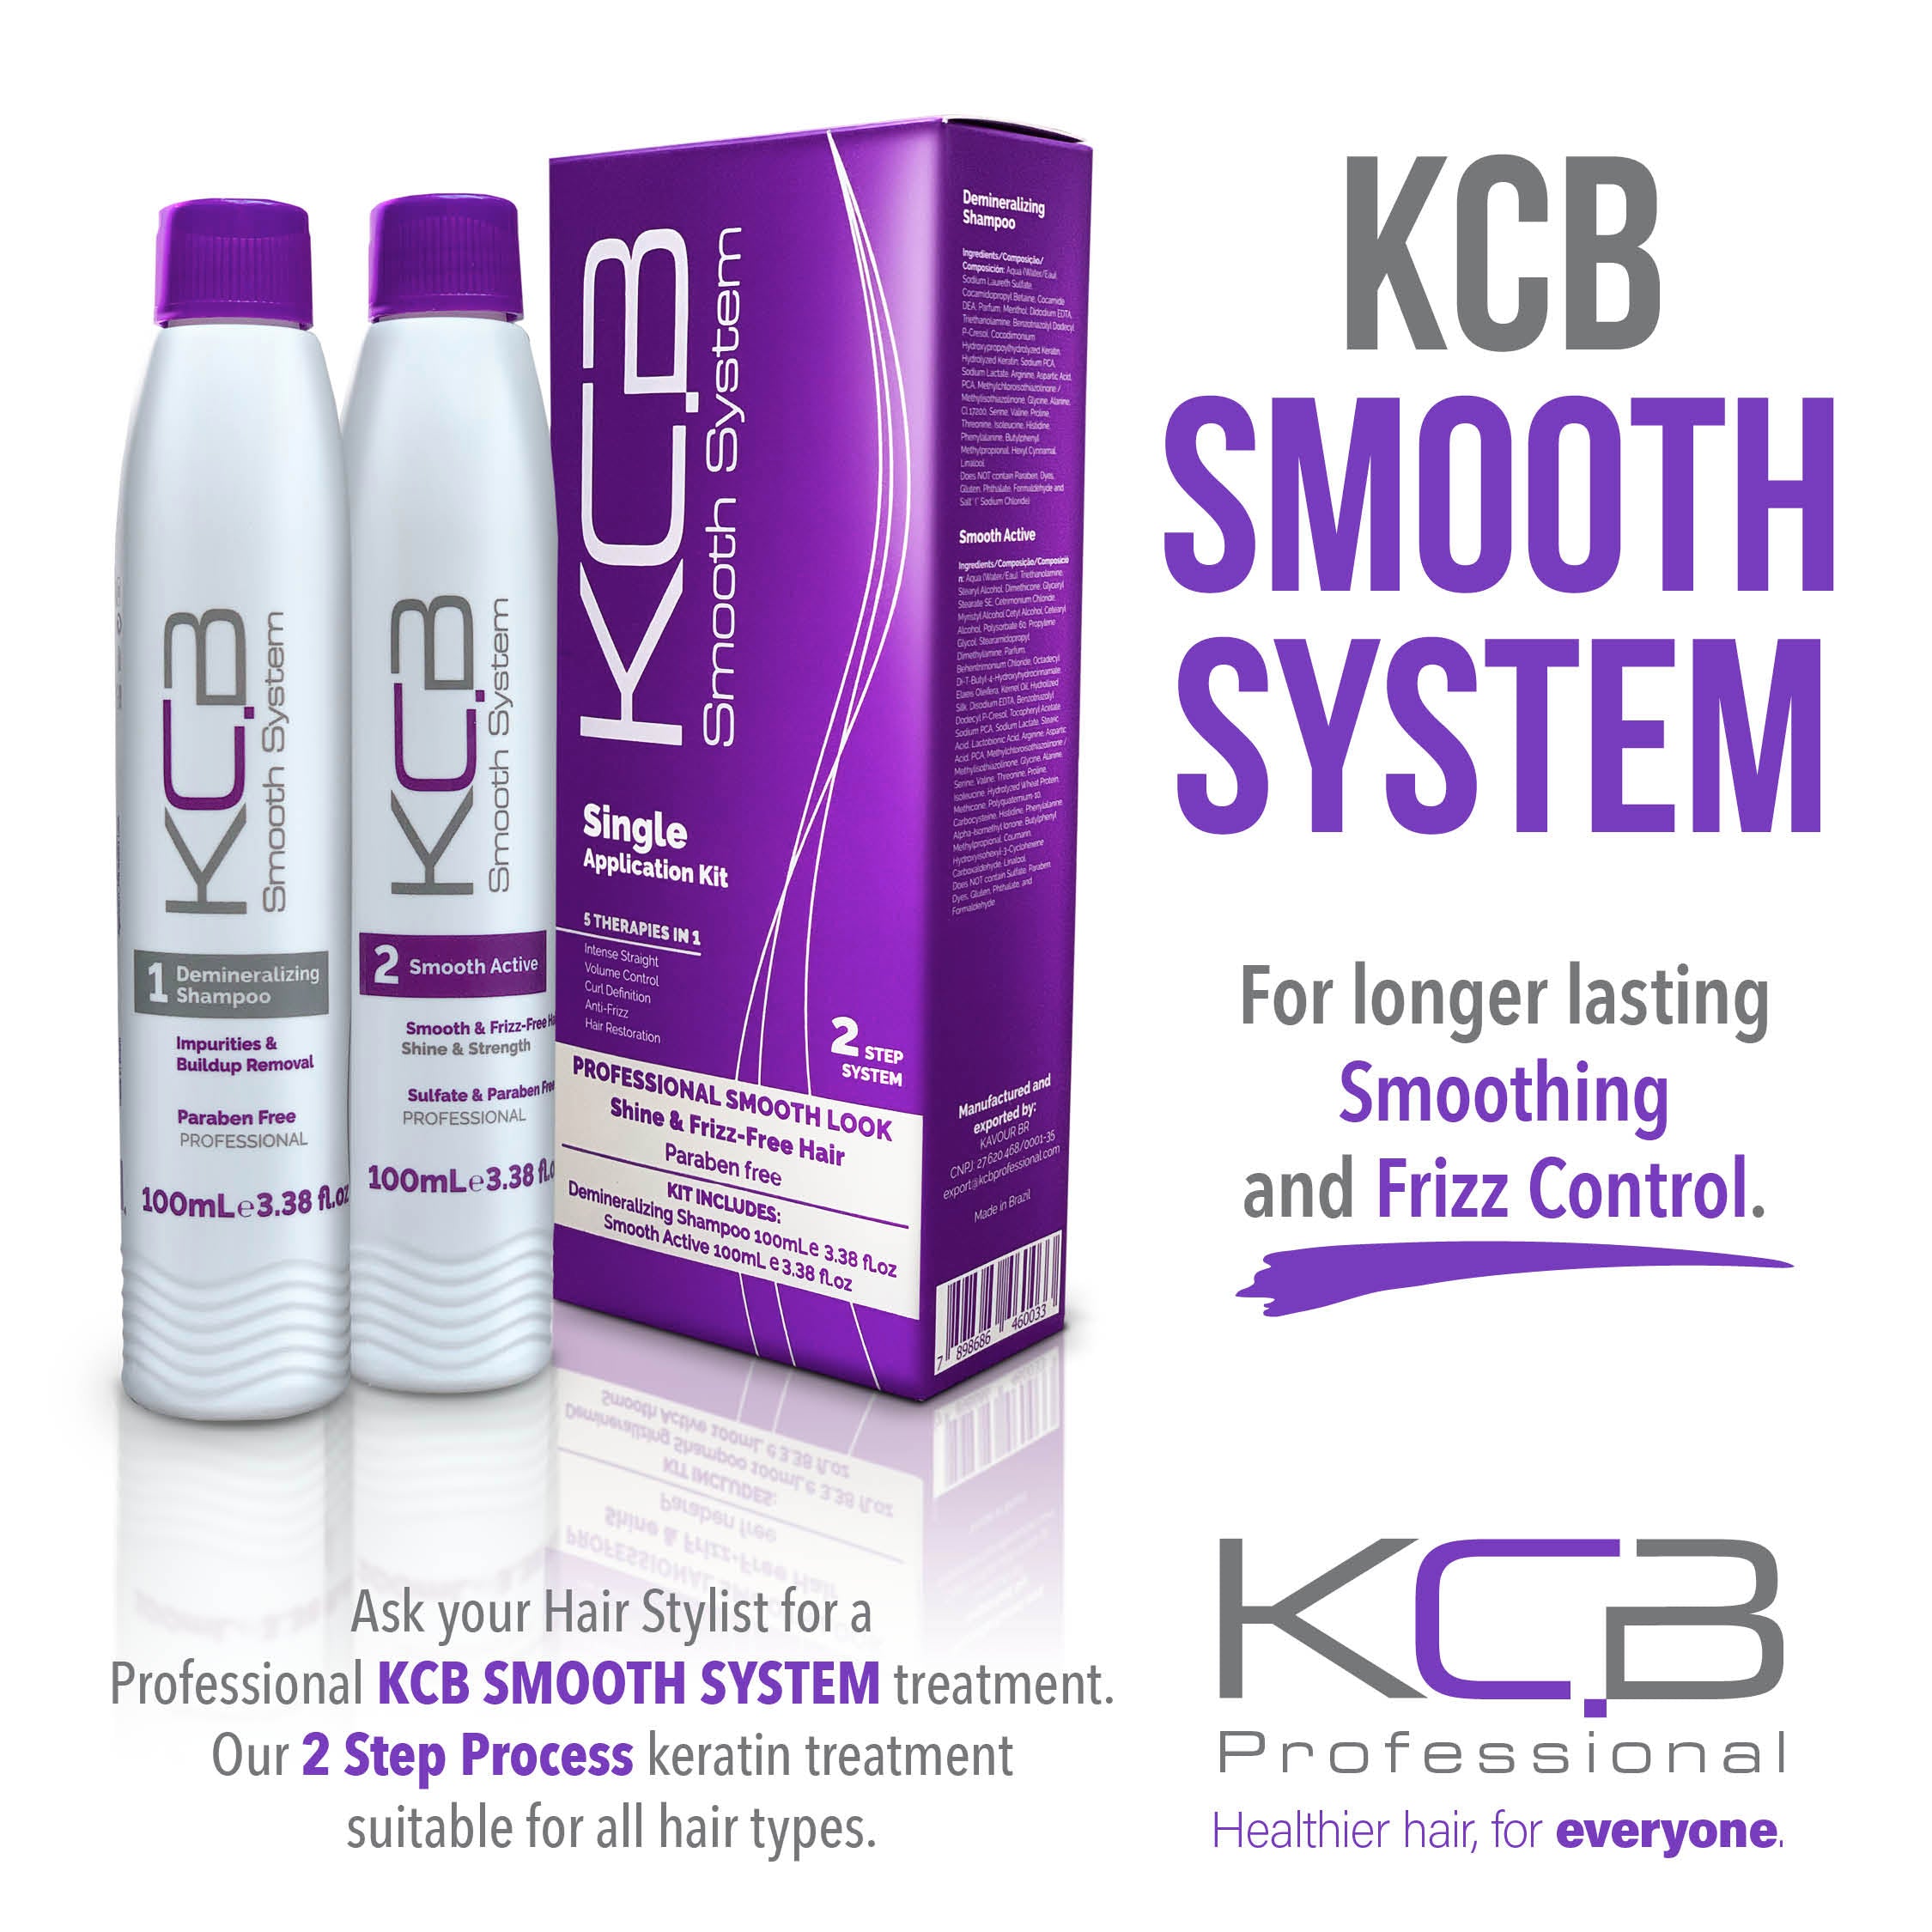 KCB Professional Smooth Repair Hair Mask for Smoothing, Deep Conditioning, Bonding Hair Treatment, Frizz Control, All Hair Types, 17.63 oz / 500g. Enriched with Jojoba Oil, Coconut and Cocoa Butter.